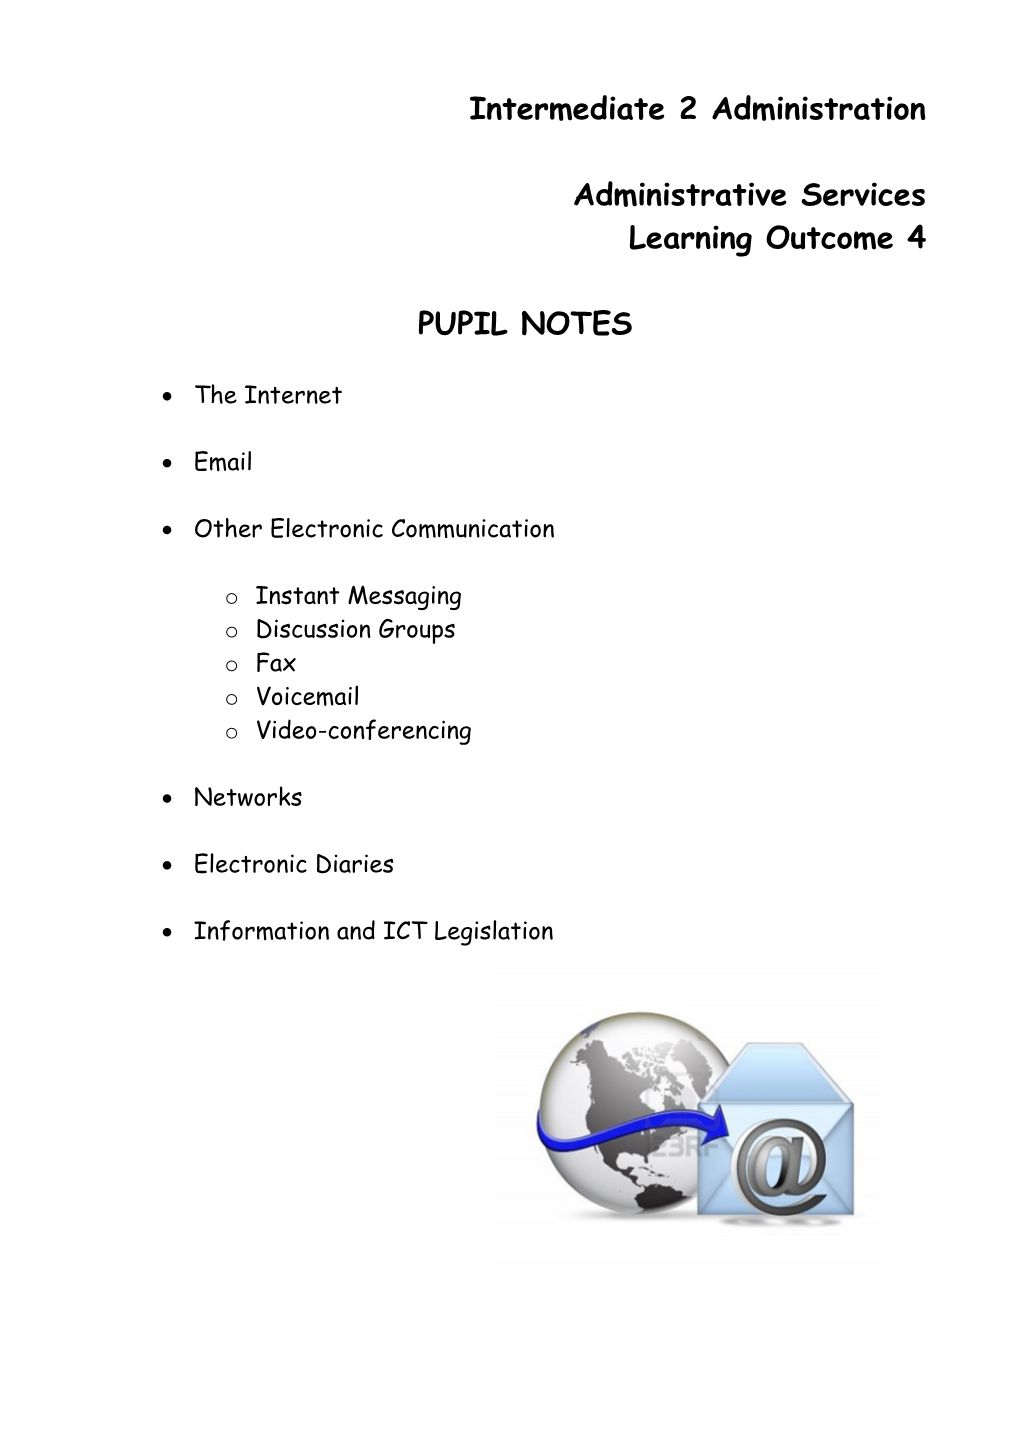 Admin Services Learning Outcome 4